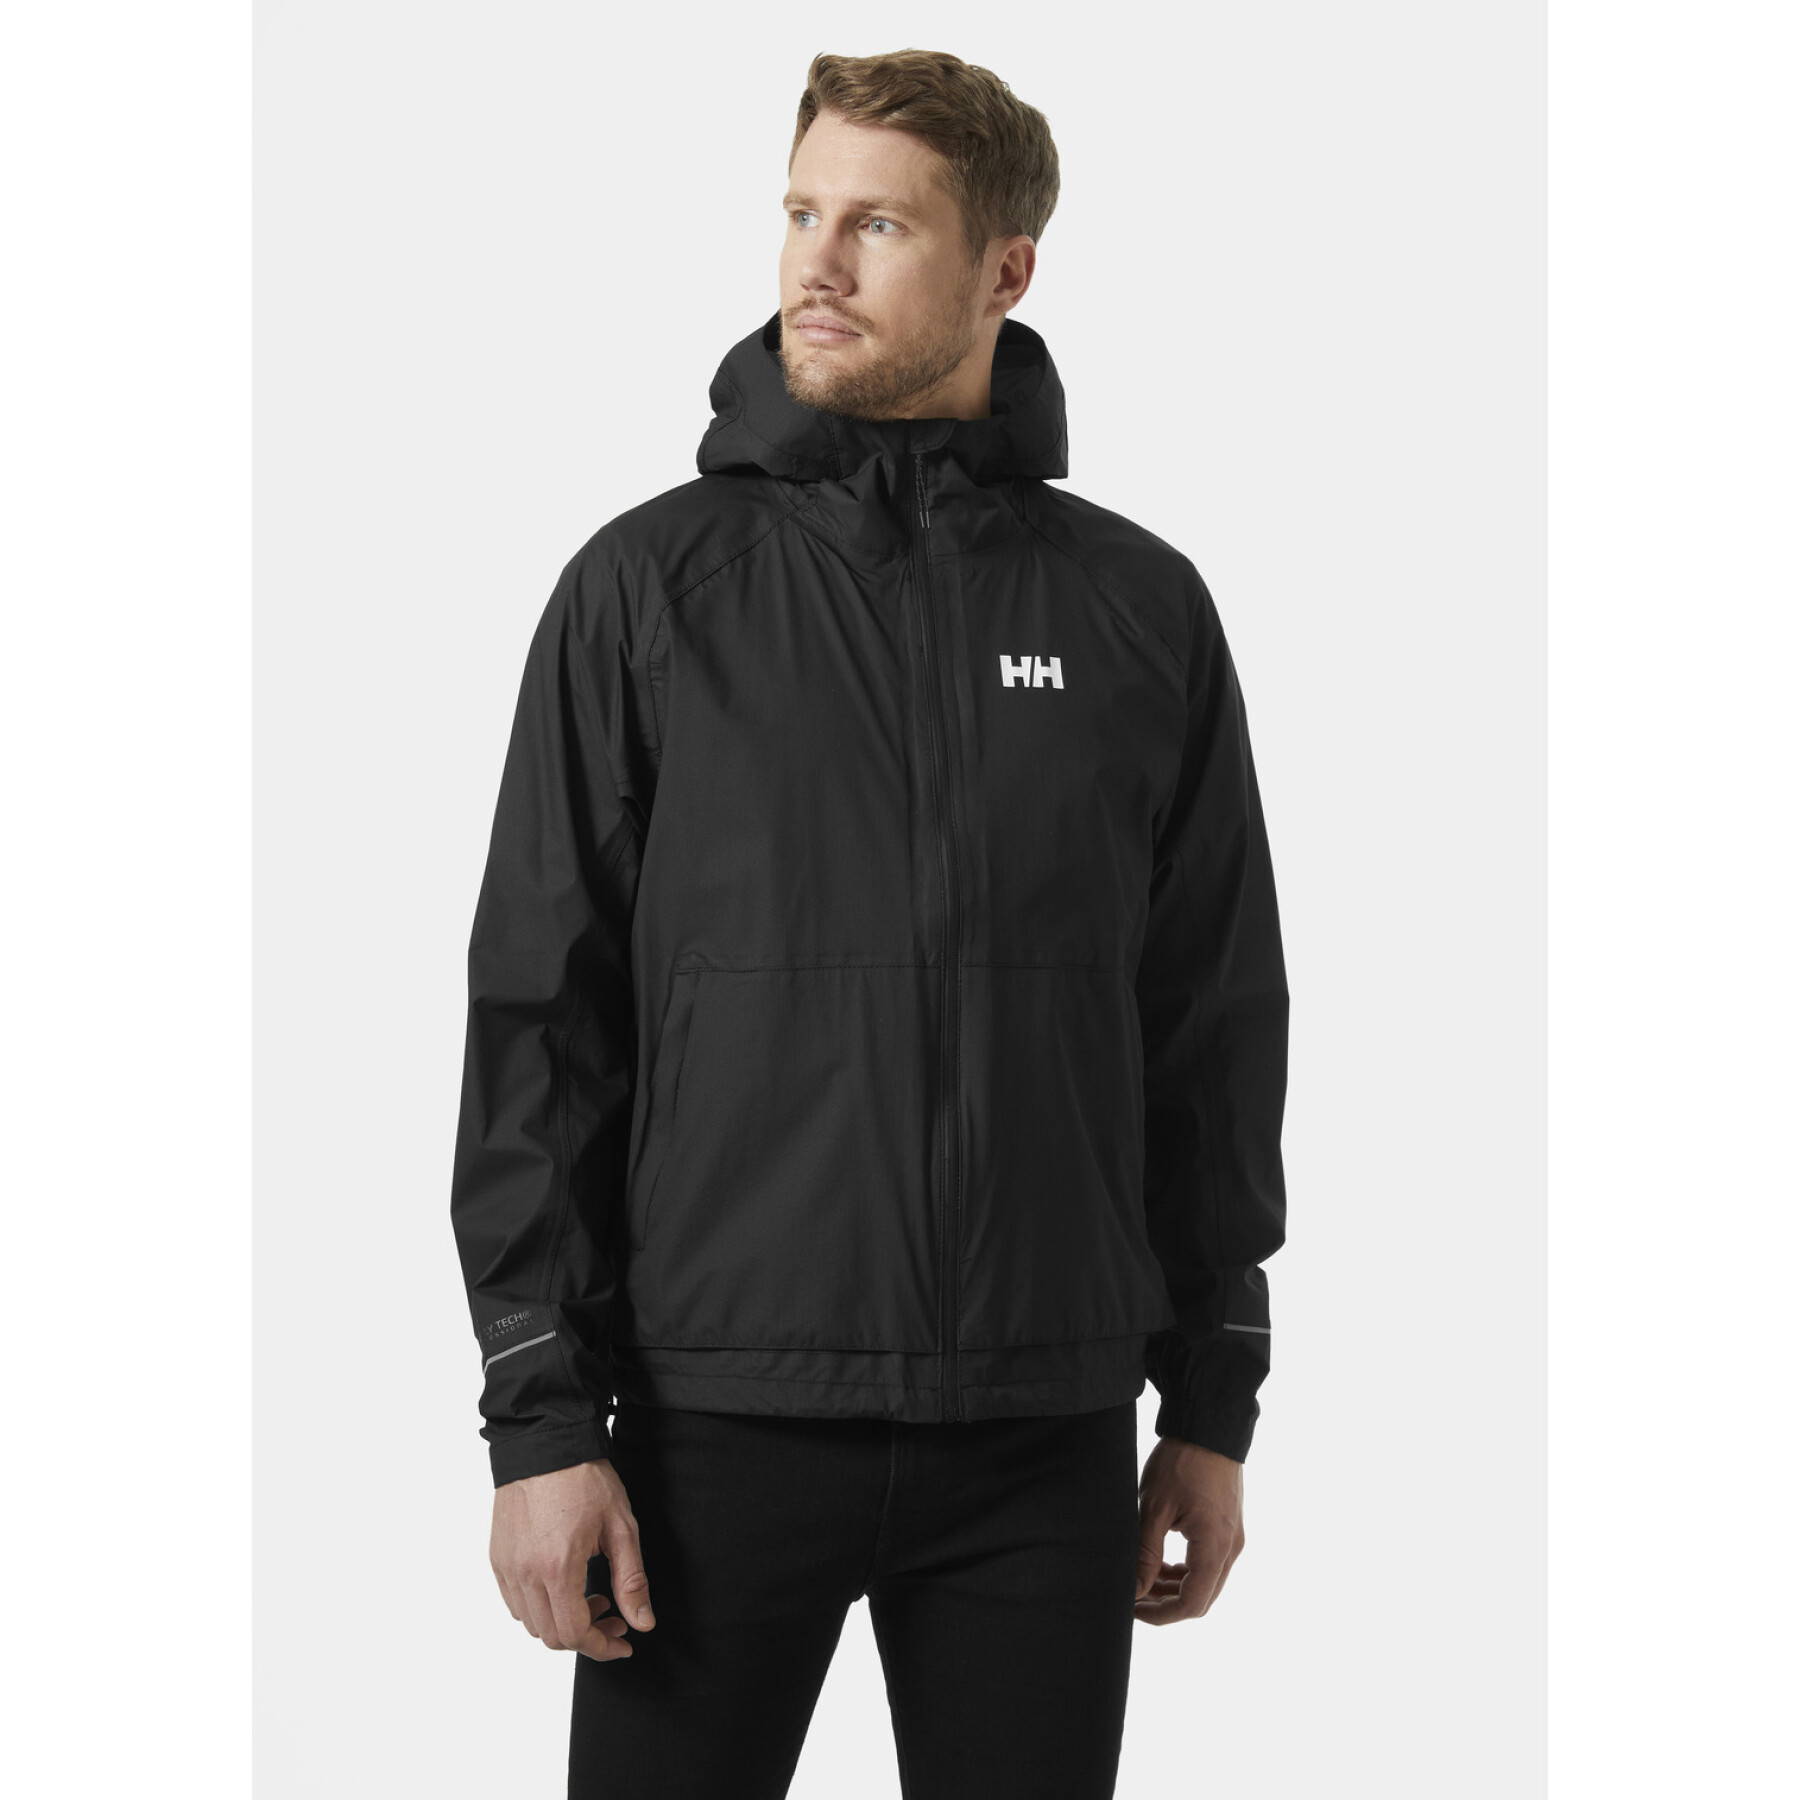 Chaqueta impermeable Helly Hansen Fast Light 3D